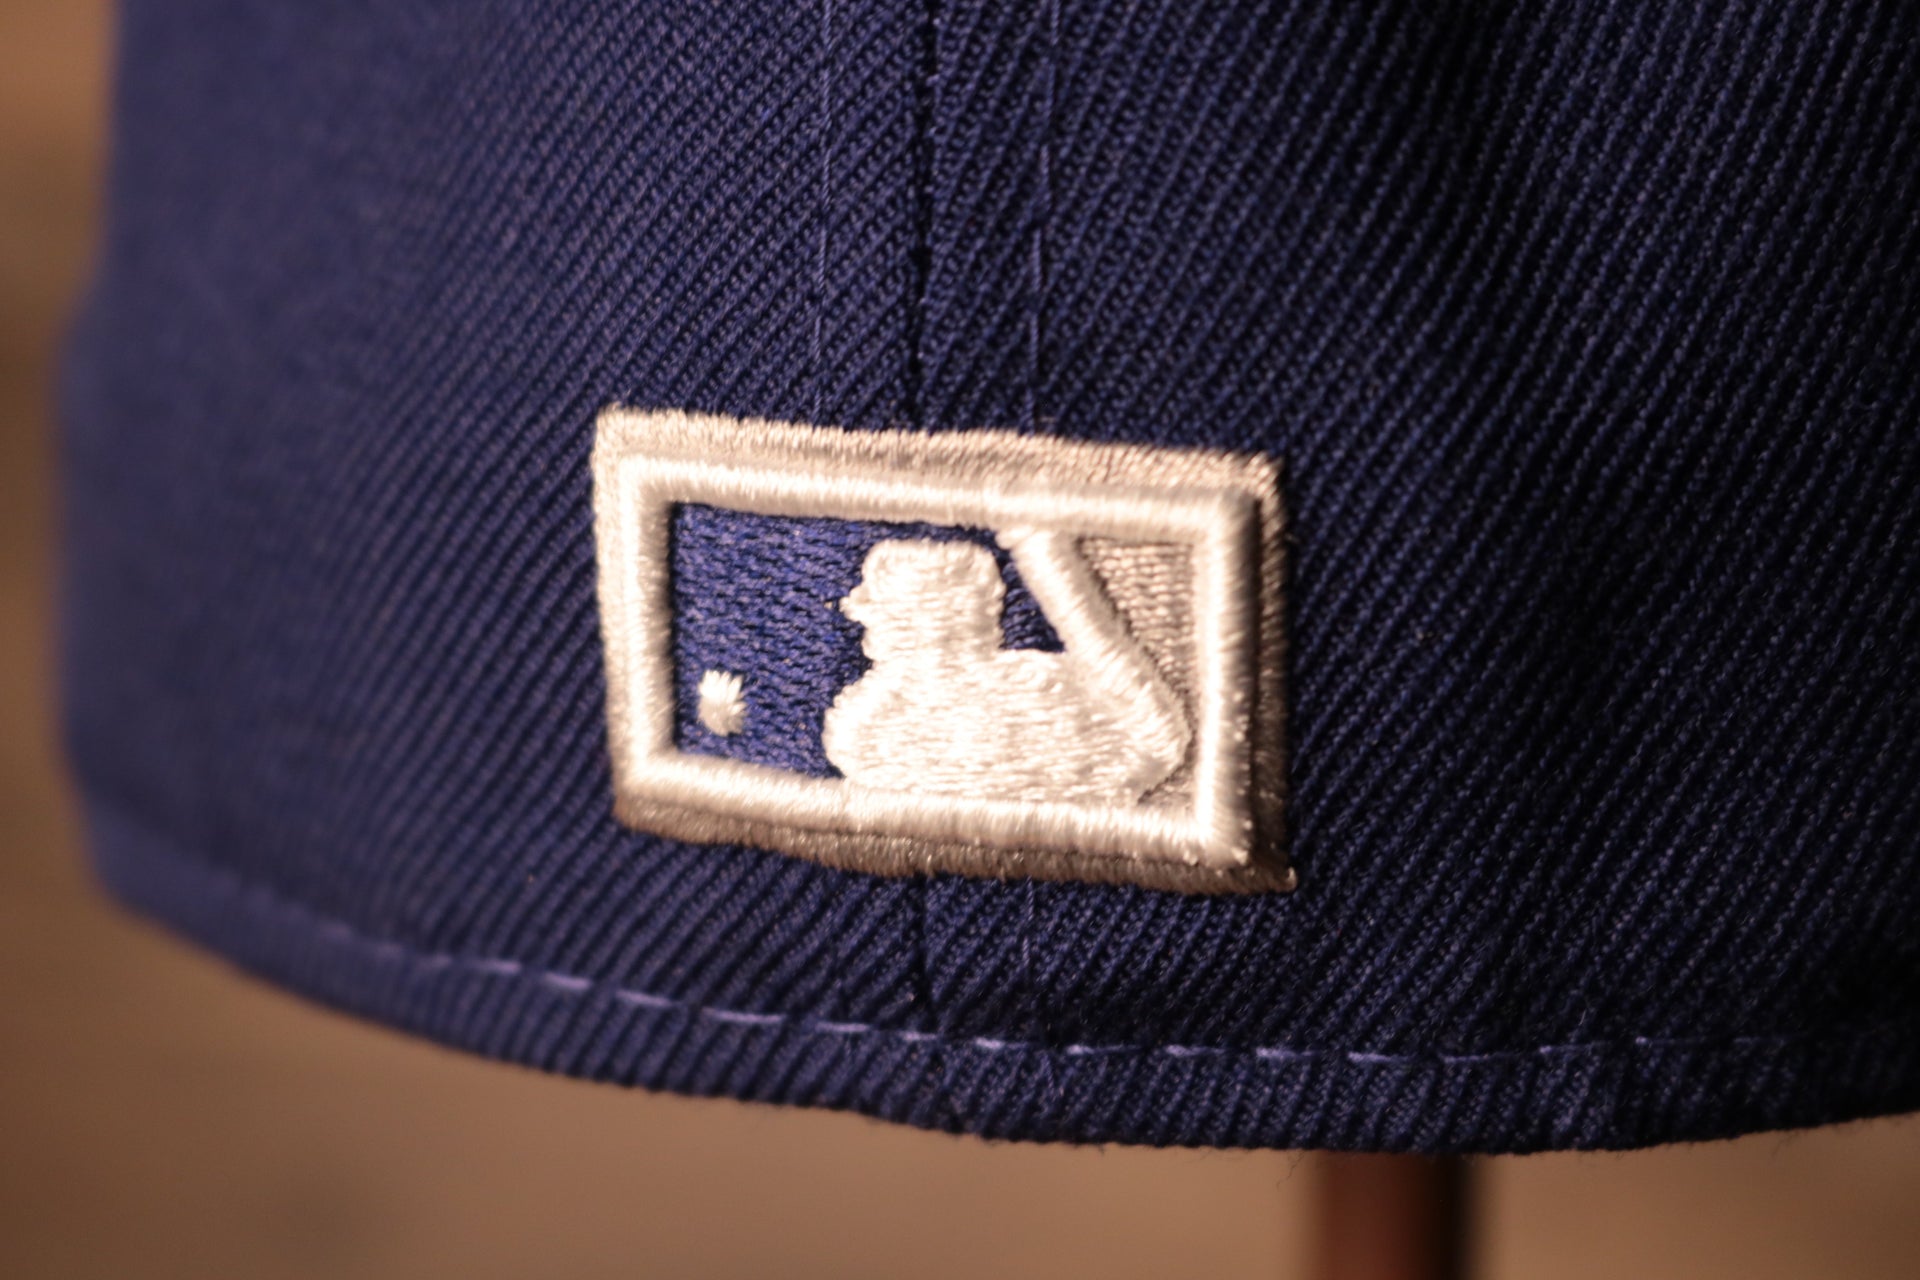 The mlb logo is on the back Dodgers Gray Bottom Fitted Cap | Los Angeles Dodgers Grey Bottom Royal Blue Fitted Hat